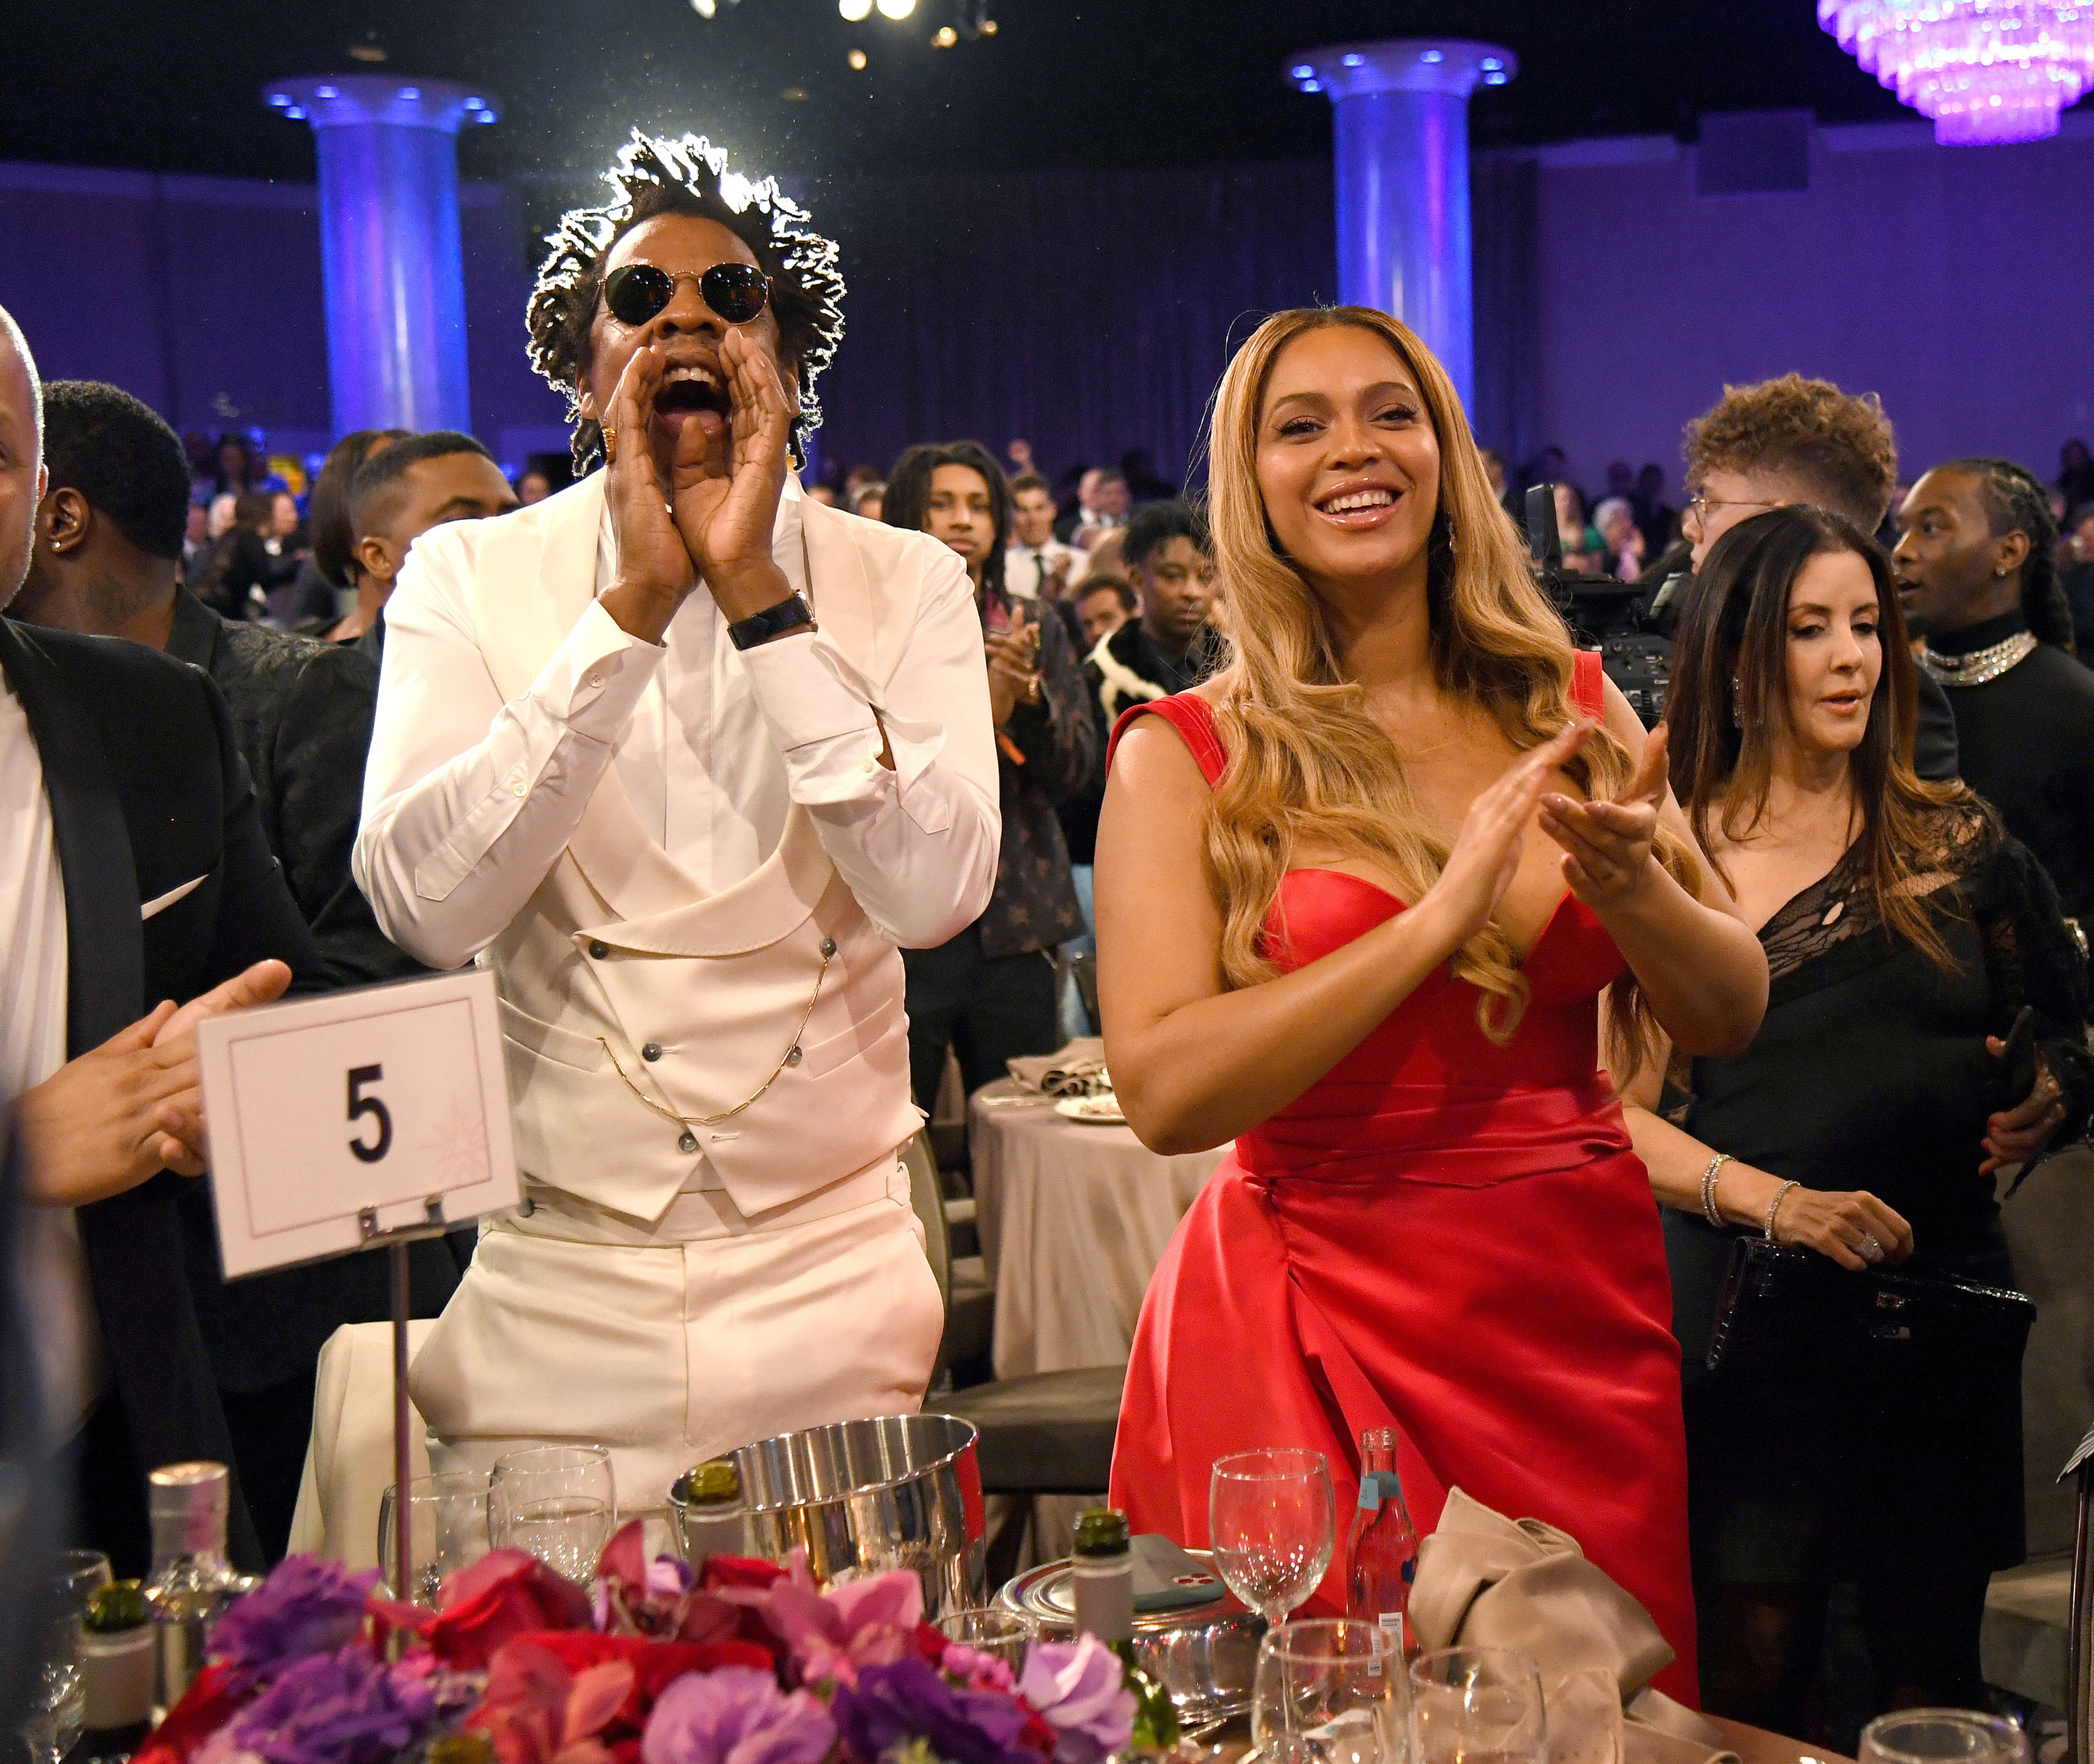 Jay-Z and Beyoncé cheer while standing beside a table at an event